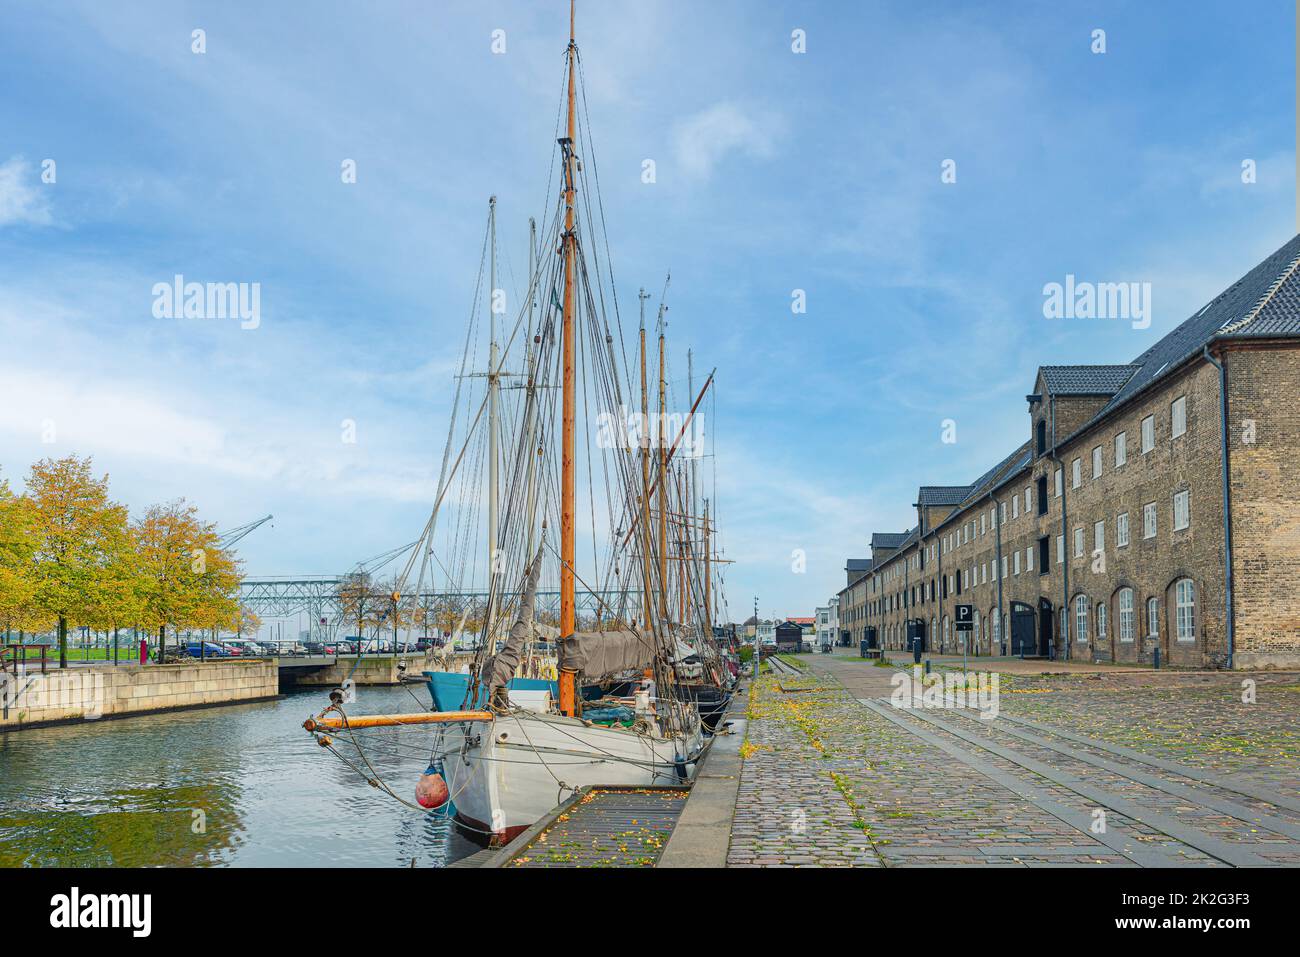 Sailboats with masts stand on the water of the canal near three-story buildings made of gray bricks on a street with a stone pavement Christianshavn.Copenhagen, Denmark Stock Photo